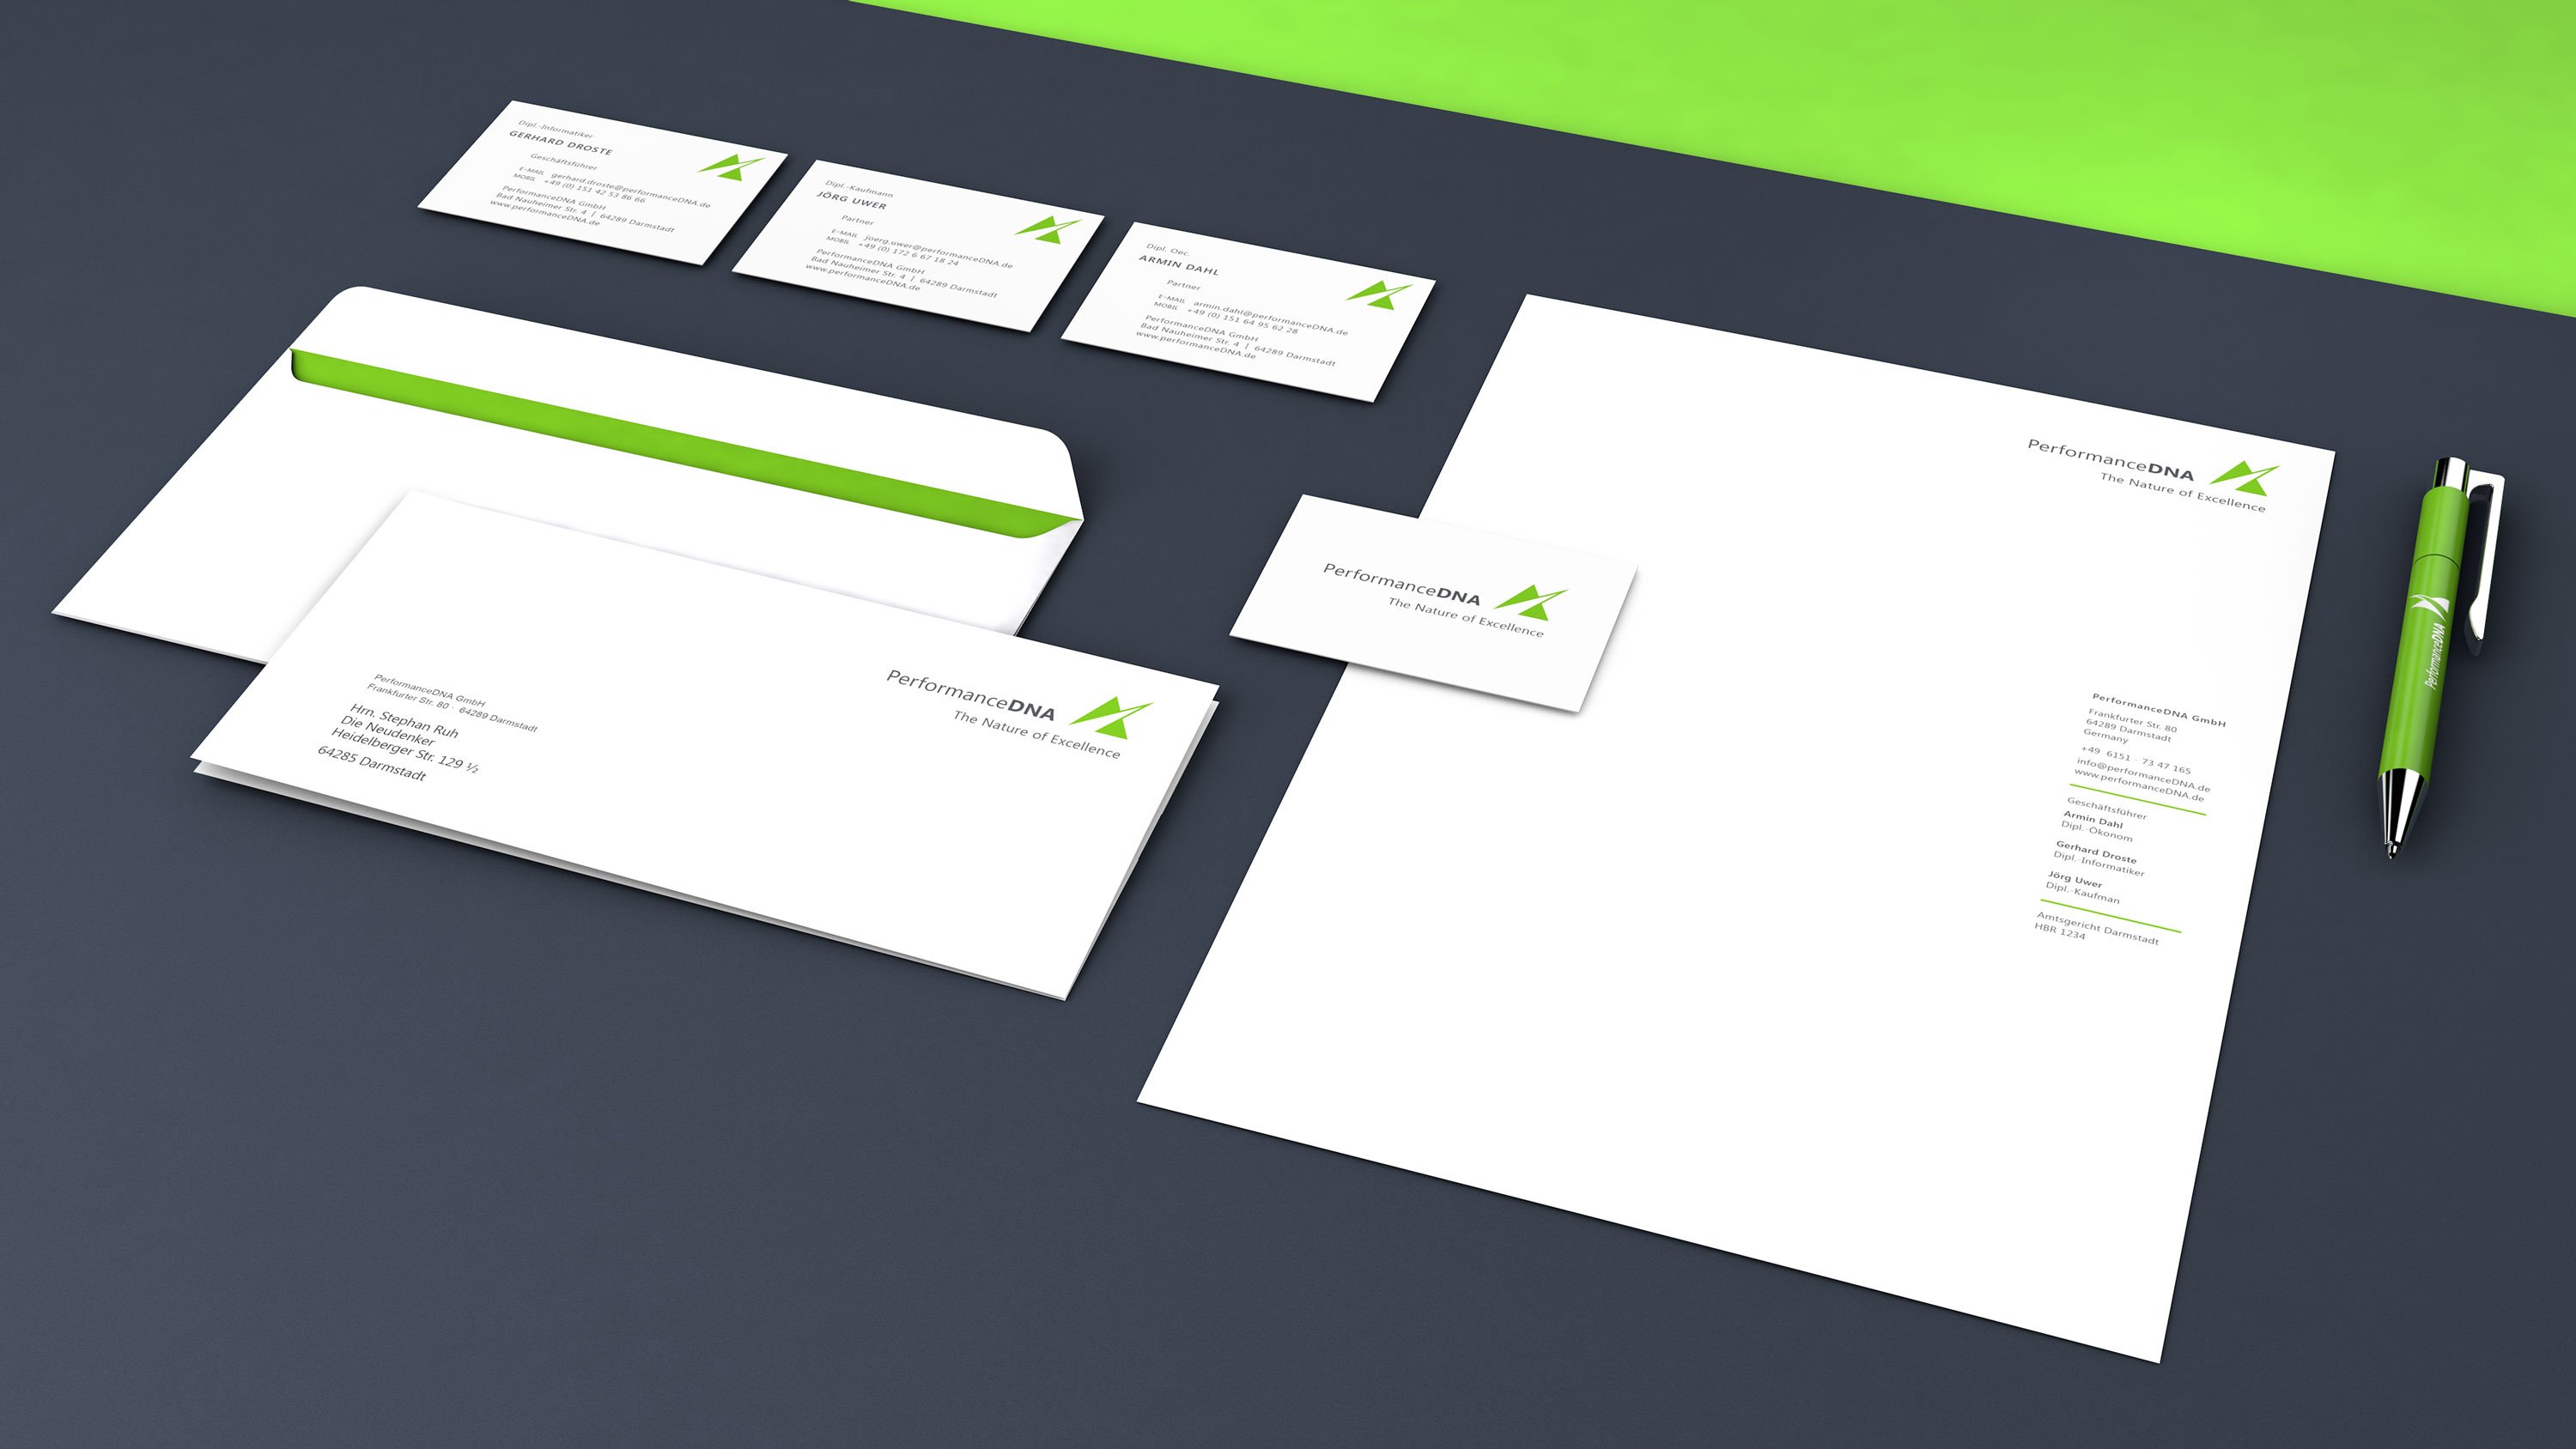 Brand concept, stationery, business cards and logo for Performance DNA, start-up: DIE NEUDENKER® Agency, Darmstadt